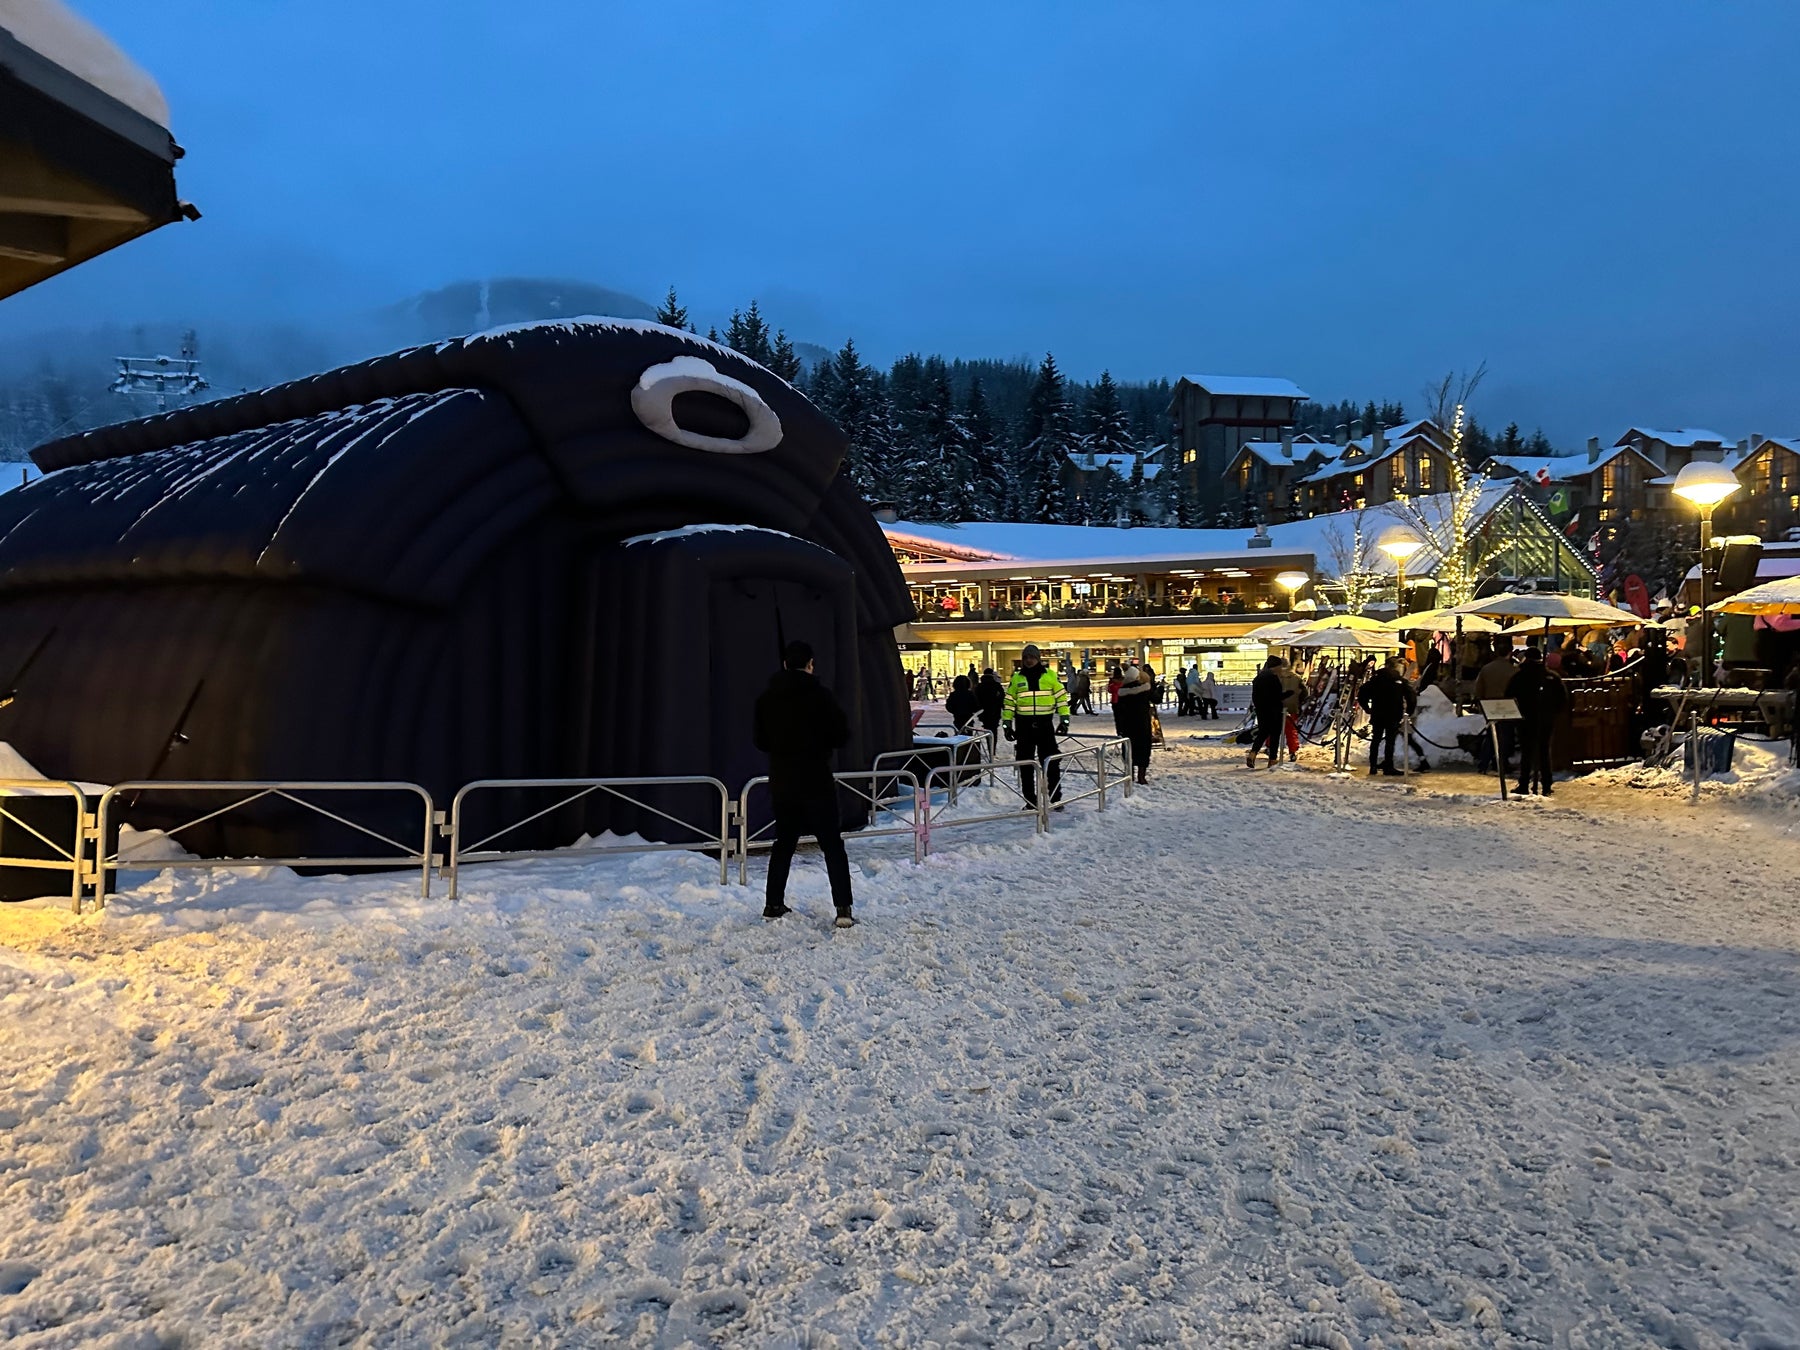 Oakley's inflatable tent